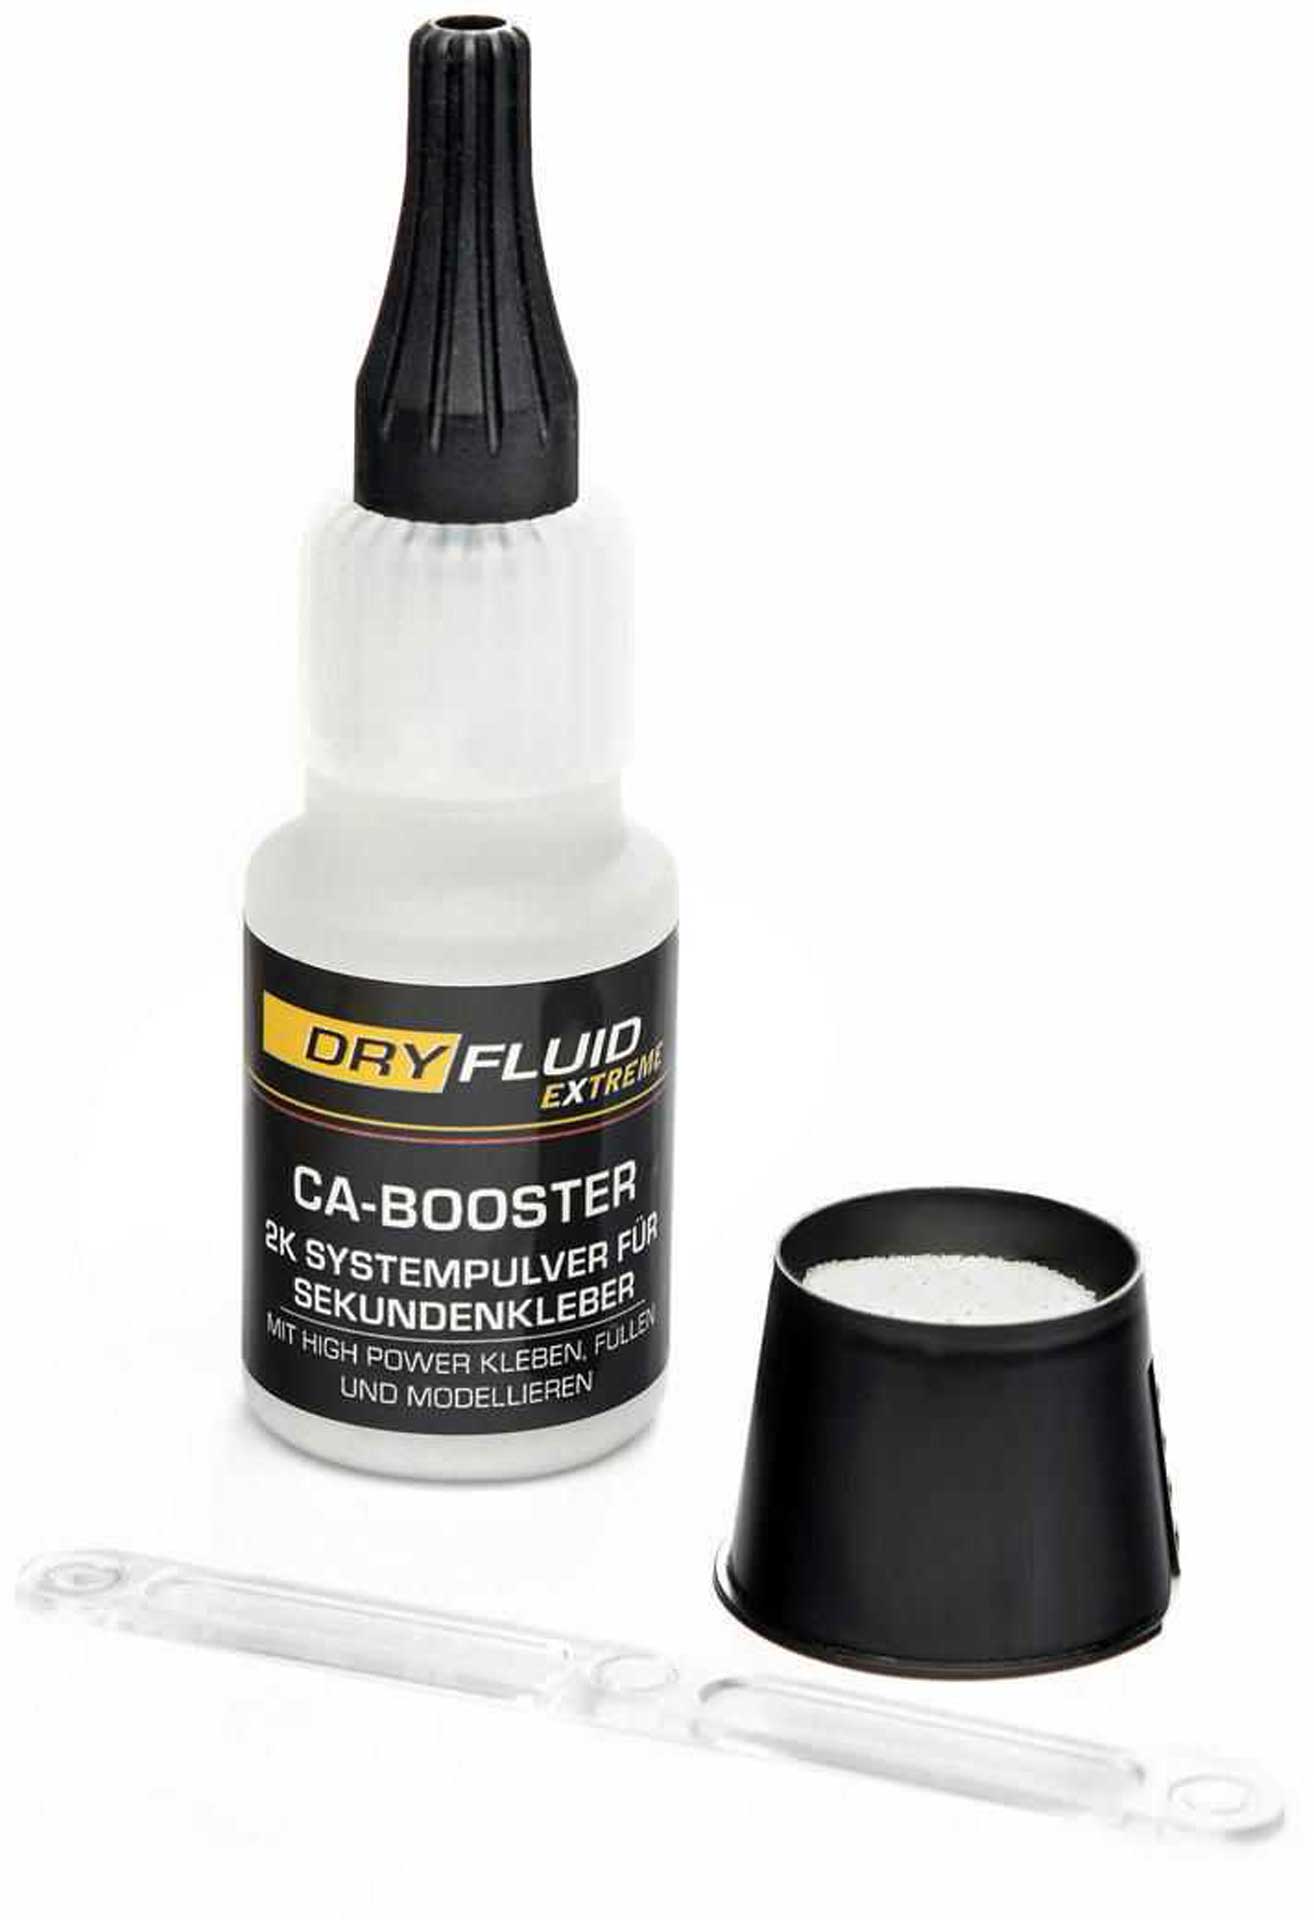 DRYFLUID CA BOOSTER POWER BOOSTER POWDER 10G FOR INSTANT GLUE